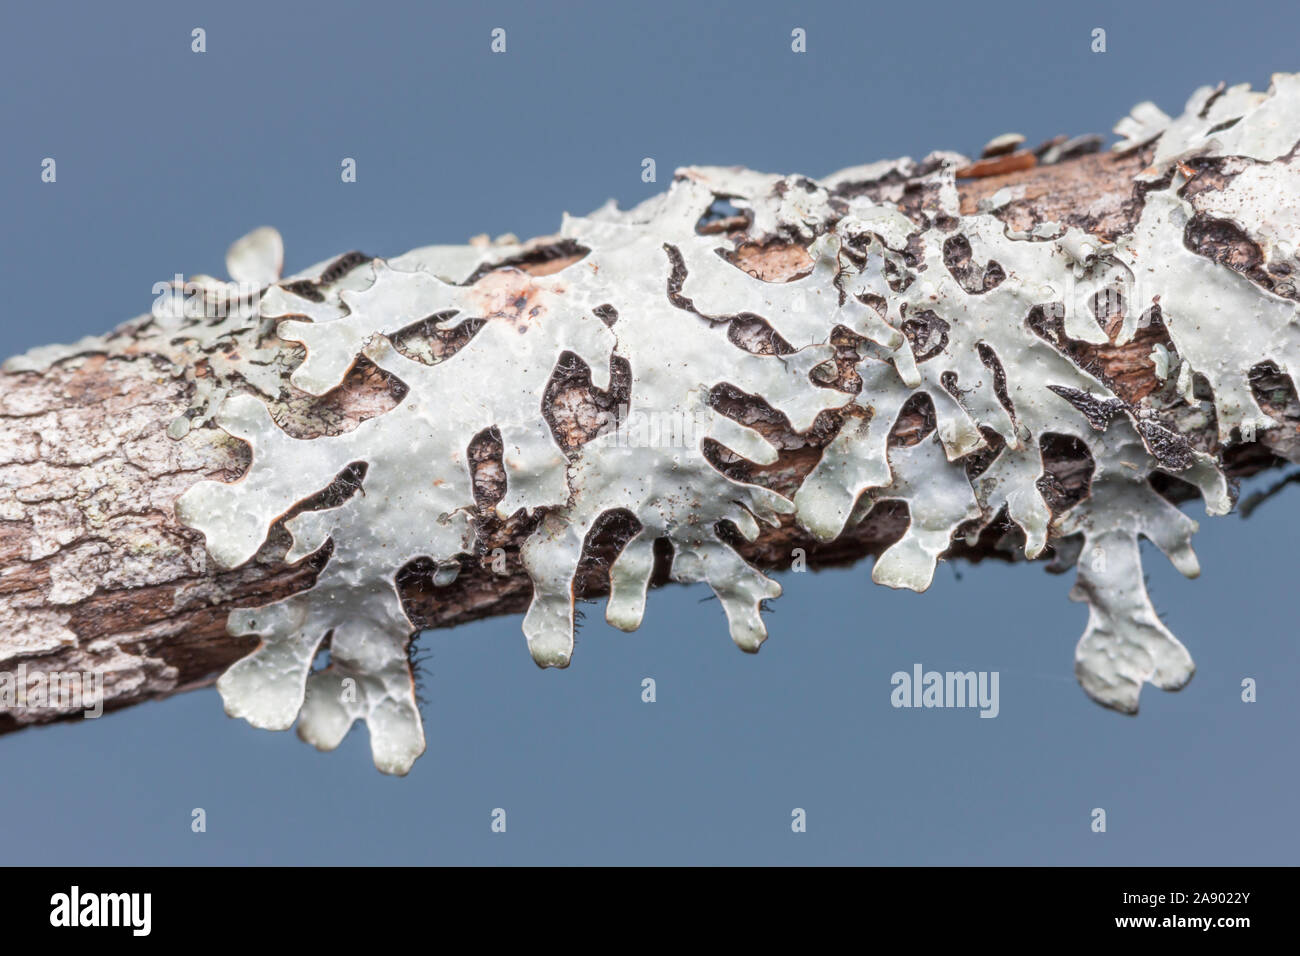 Shield Lichen (Parmelia sulcata) growing on a rotting tree branch. Stock Photo